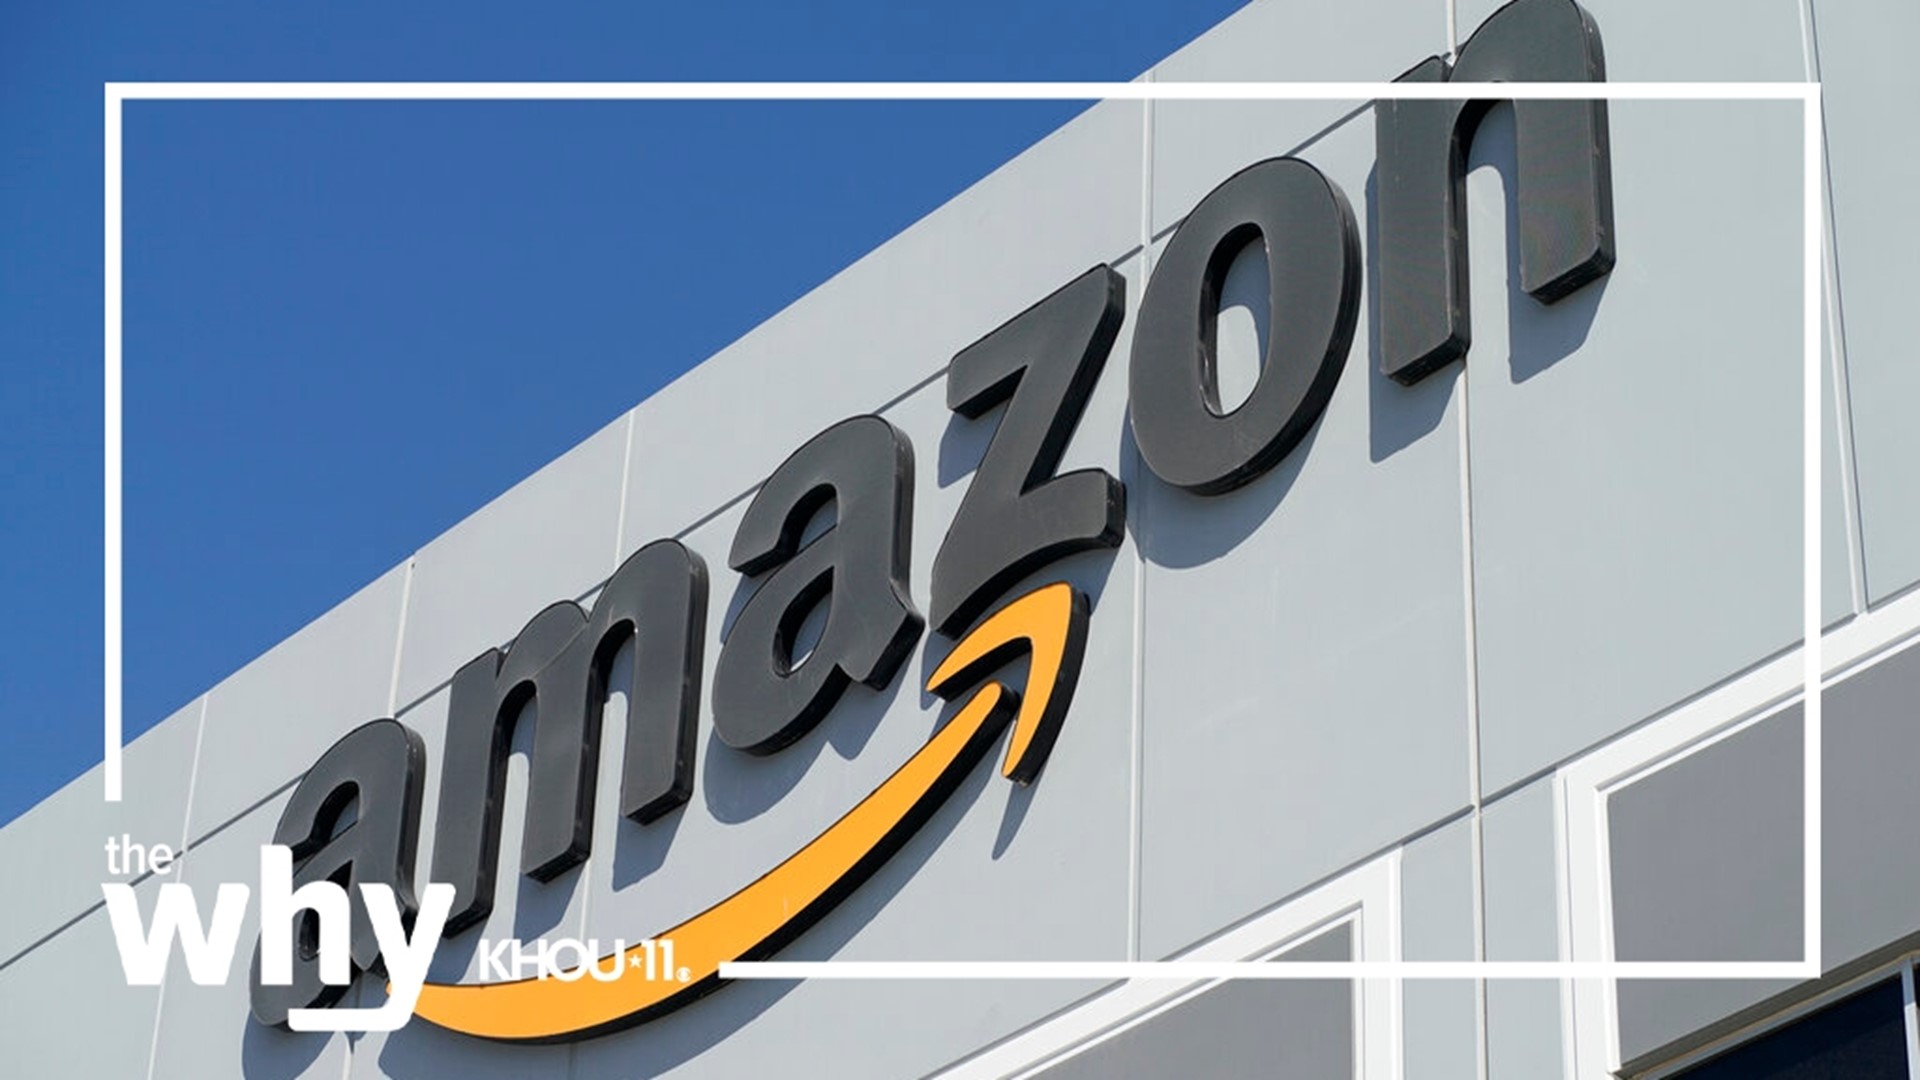 According to reports, Amazon is now upping the cost for those third-party sellers over the holiday shopping season.